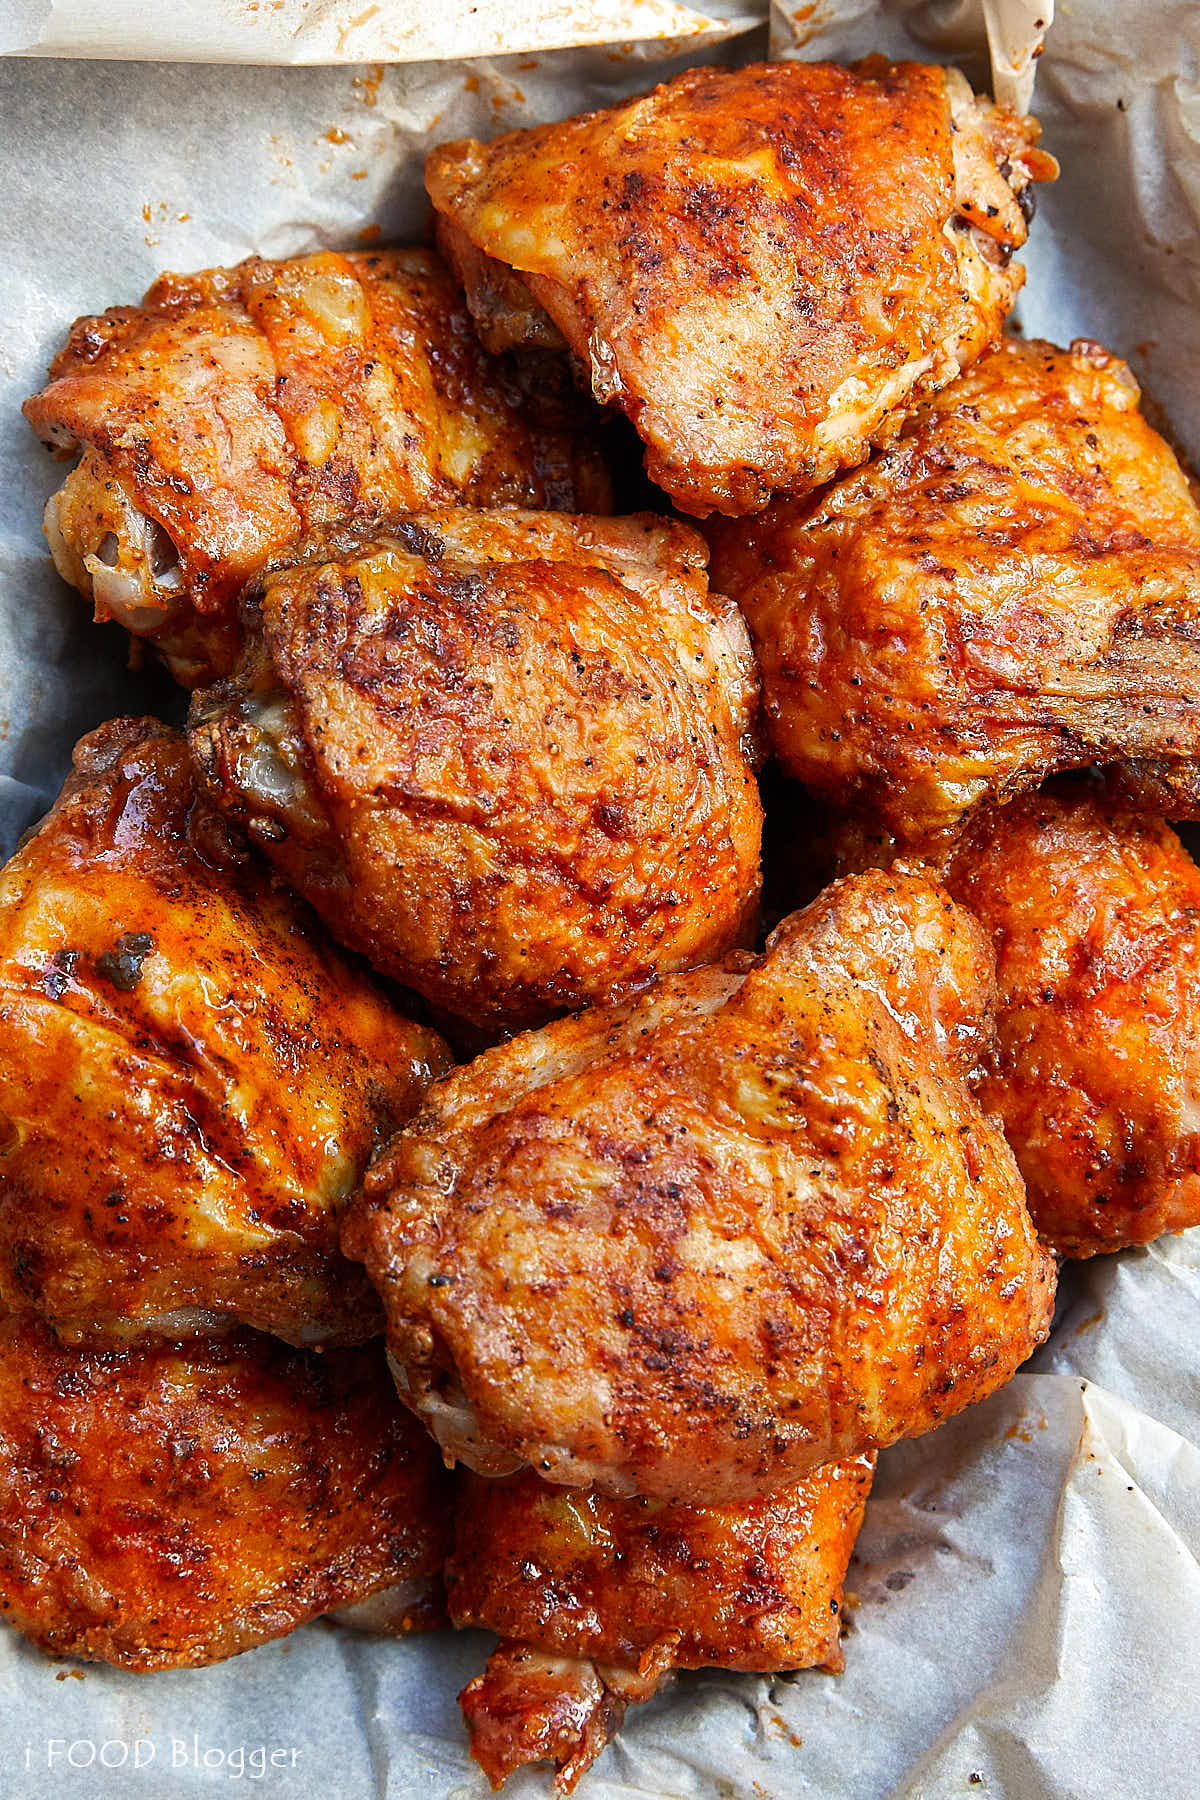 These oven-fried chicken thighs are extra crispy on the outside and very tender and juicy on the inside. There isn't a more succulent baked chicken thigh than this. They are like deep-fried chicken thighs, only without a mess and all the added calories. Oh, and they only take about 30 minutes to bake. | ifoodblogger.com